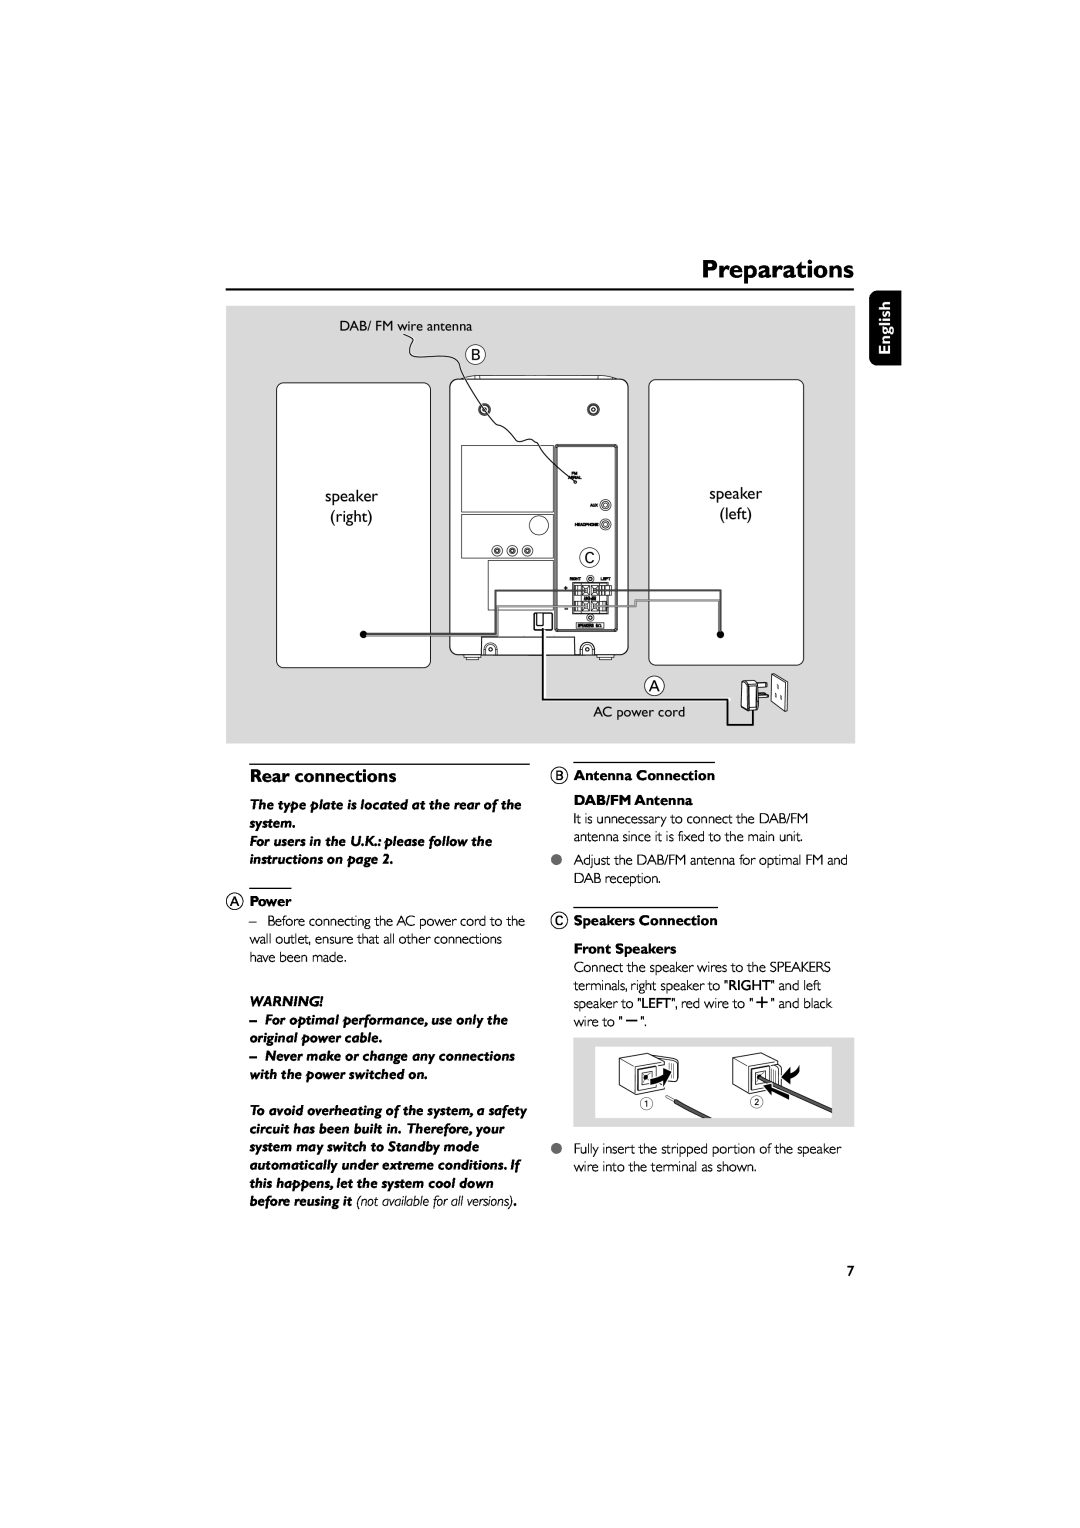 Philips MCB146 user manual Preparations, Rear connections, APower, BAntenna Connection DAB/FM Antenna, right, left, English 